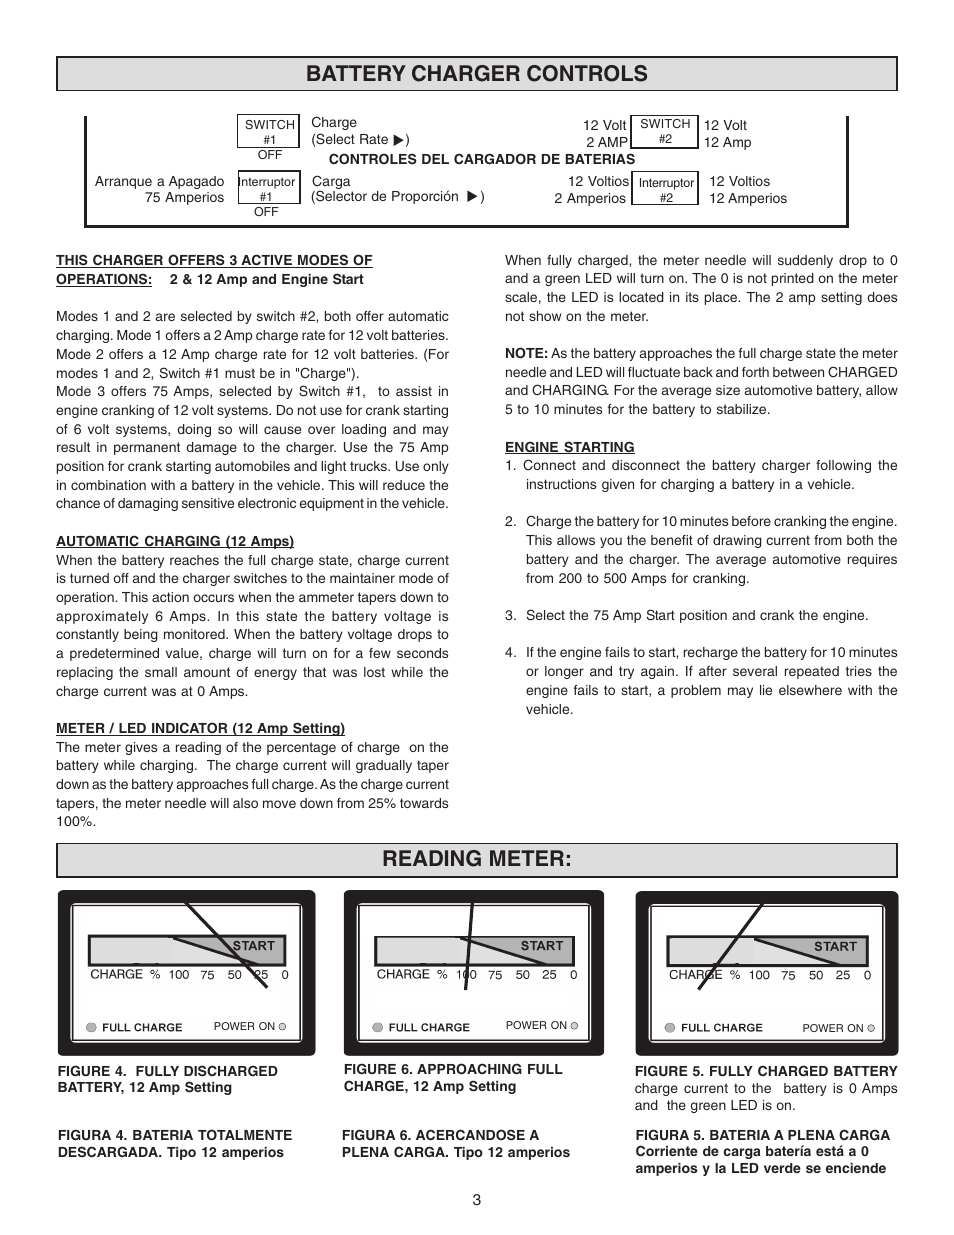 Battery charger controls reading meter | Schumacher 1275A-PE User Manual |  Page 3 / 8 | Original mode